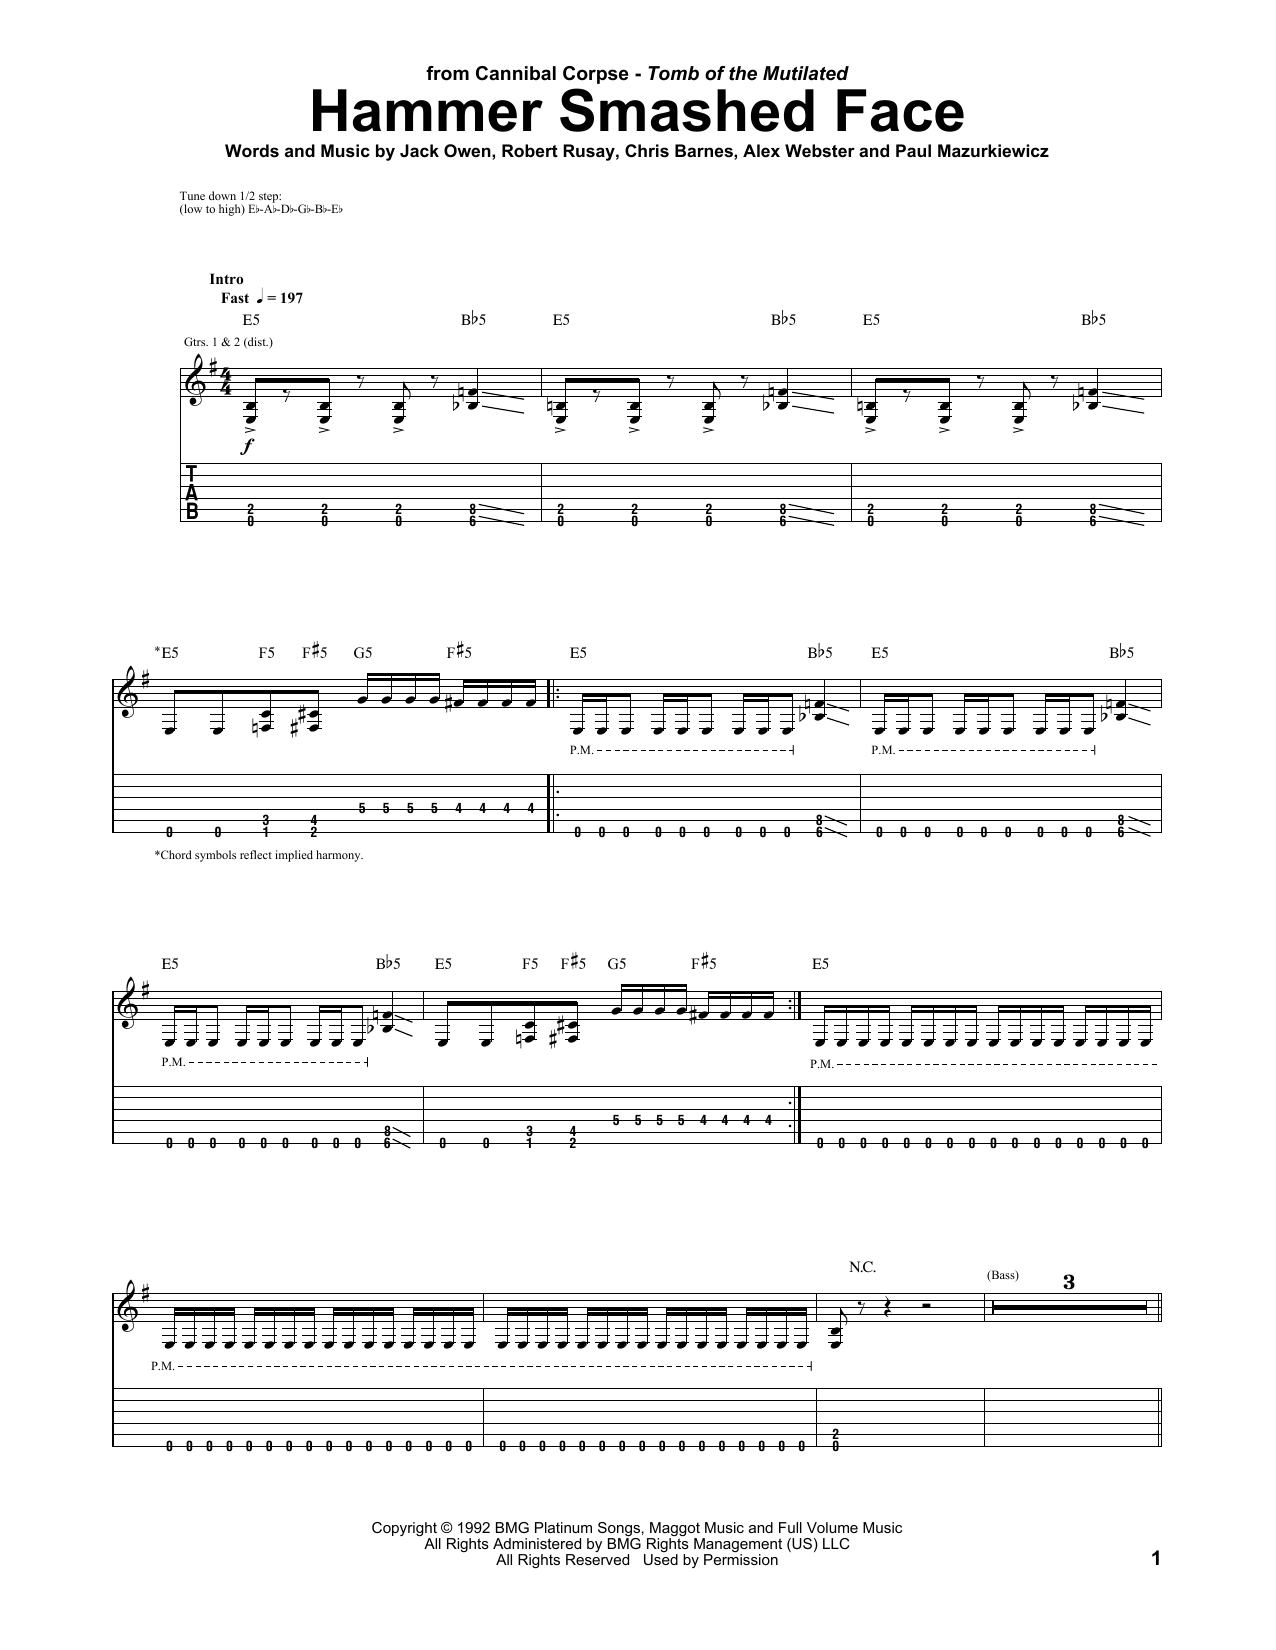 Download Cannibal Corpse Hammer Smashed Face Sheet Music